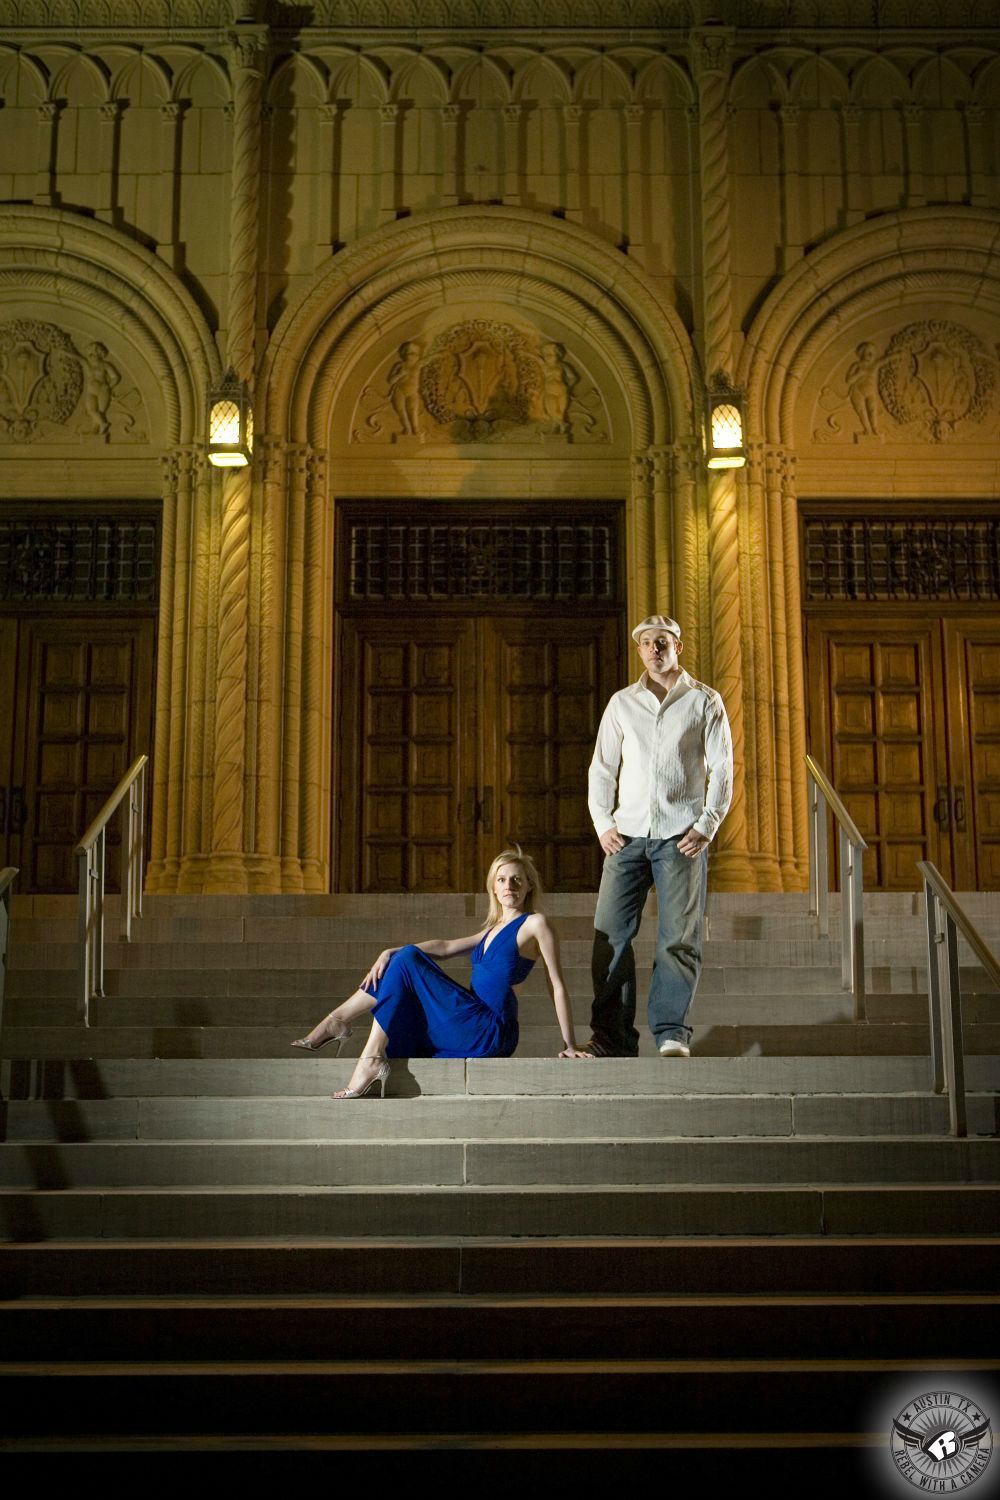 hot blond with long blue dress and tan heels sits seductively on steps near a standing guy with a cab driver hat wearing a light blue button up shirt and blue jeans also on steps in front of a gothic church with arched stone work and several large wooden doors in this intense Houston engagement picture